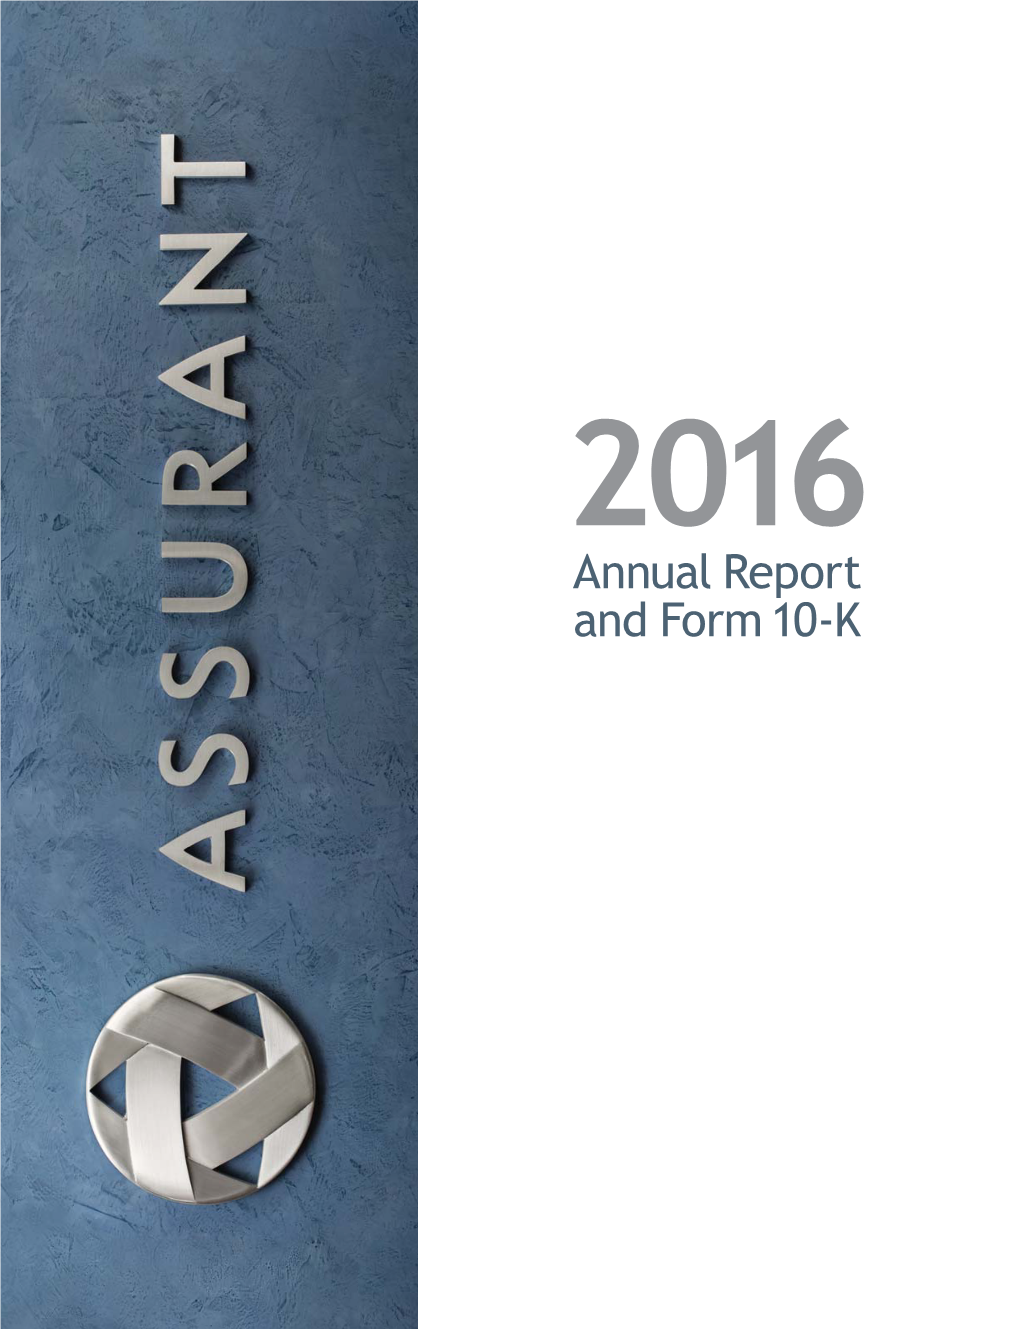 Annual Report and Form 10-K Financial Highlights